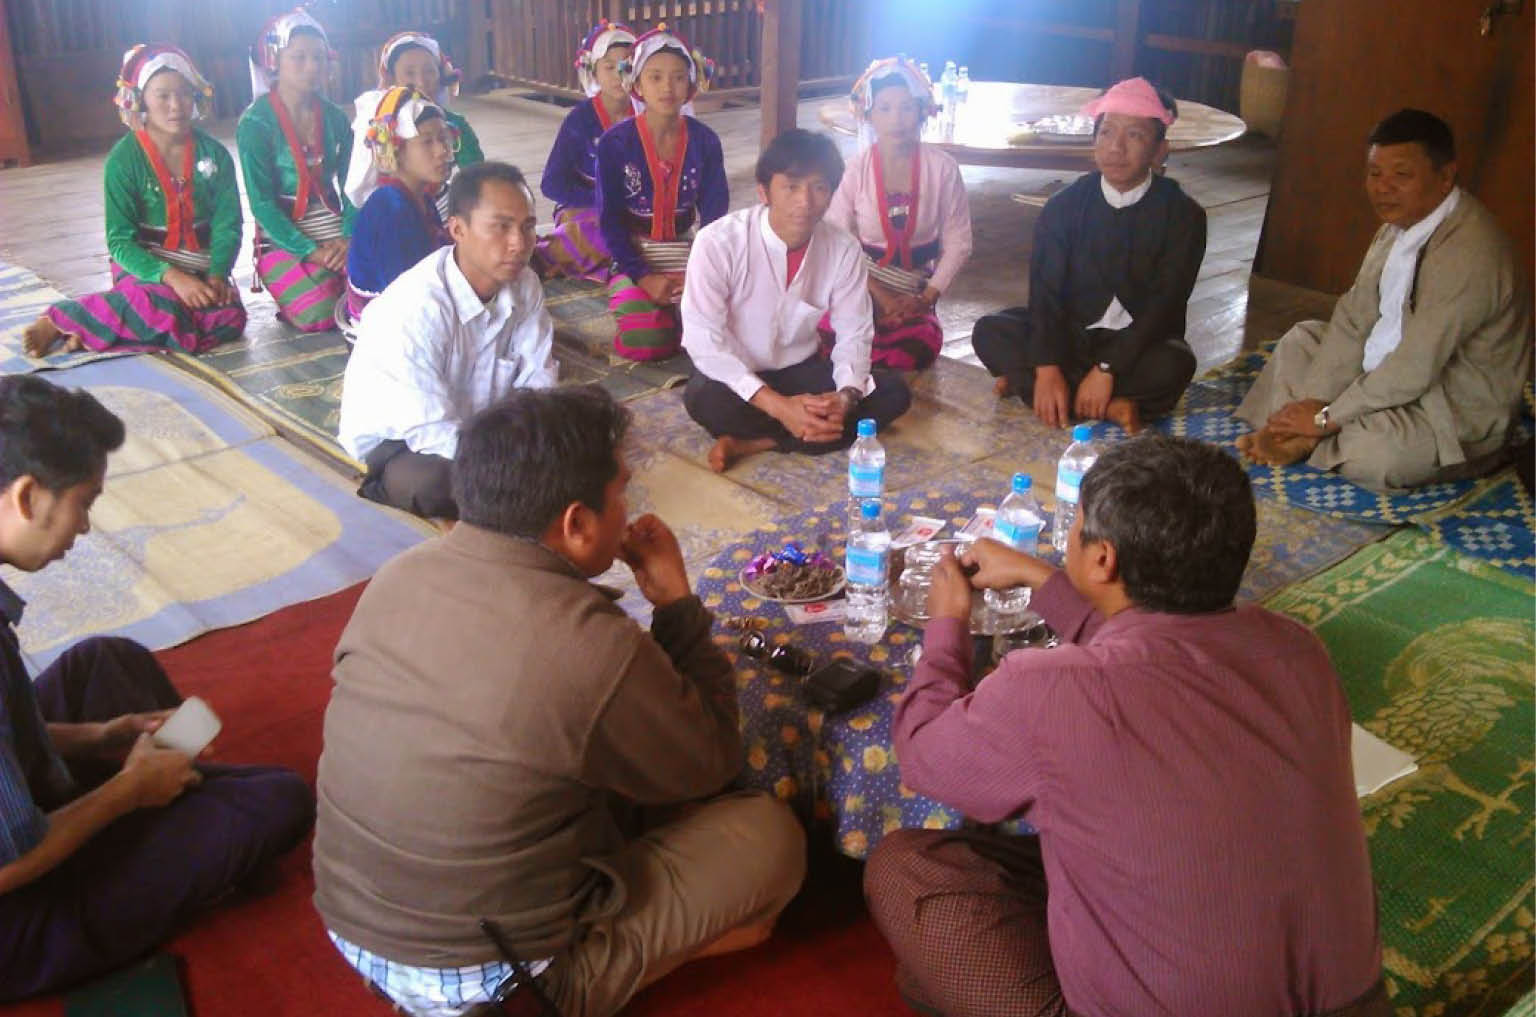 In Myanmar, a group of people sit on colourful rugs on the floor, talking in a circle around a small table